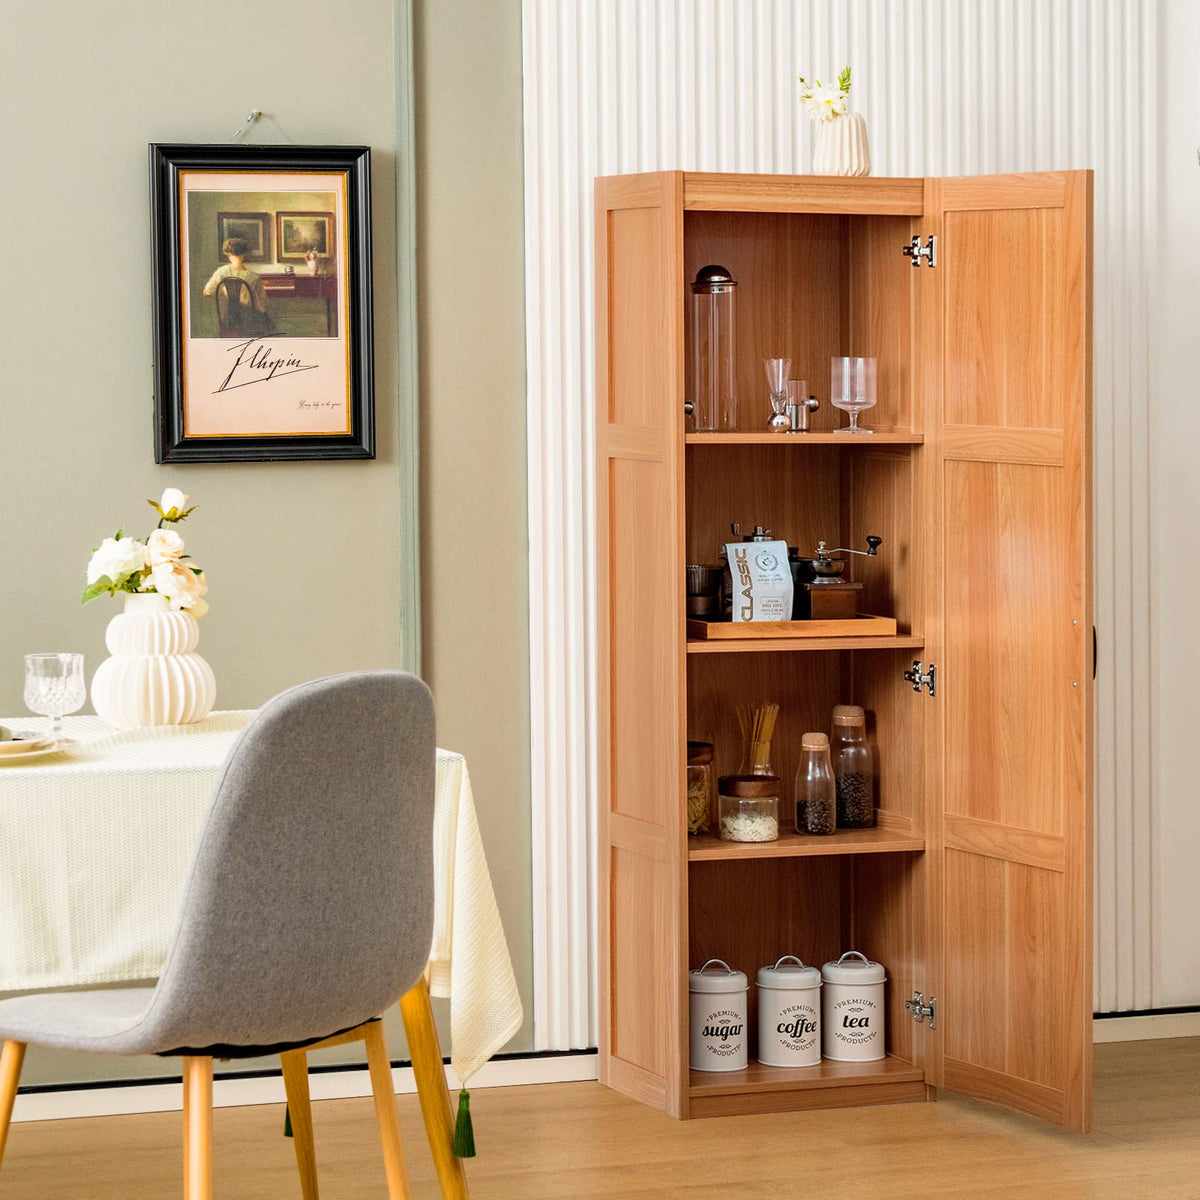 Giantex Tall Storage Cabinet, 153cm Farmhouse Freestanding Floor Cabinet with 4 Storage Shelves